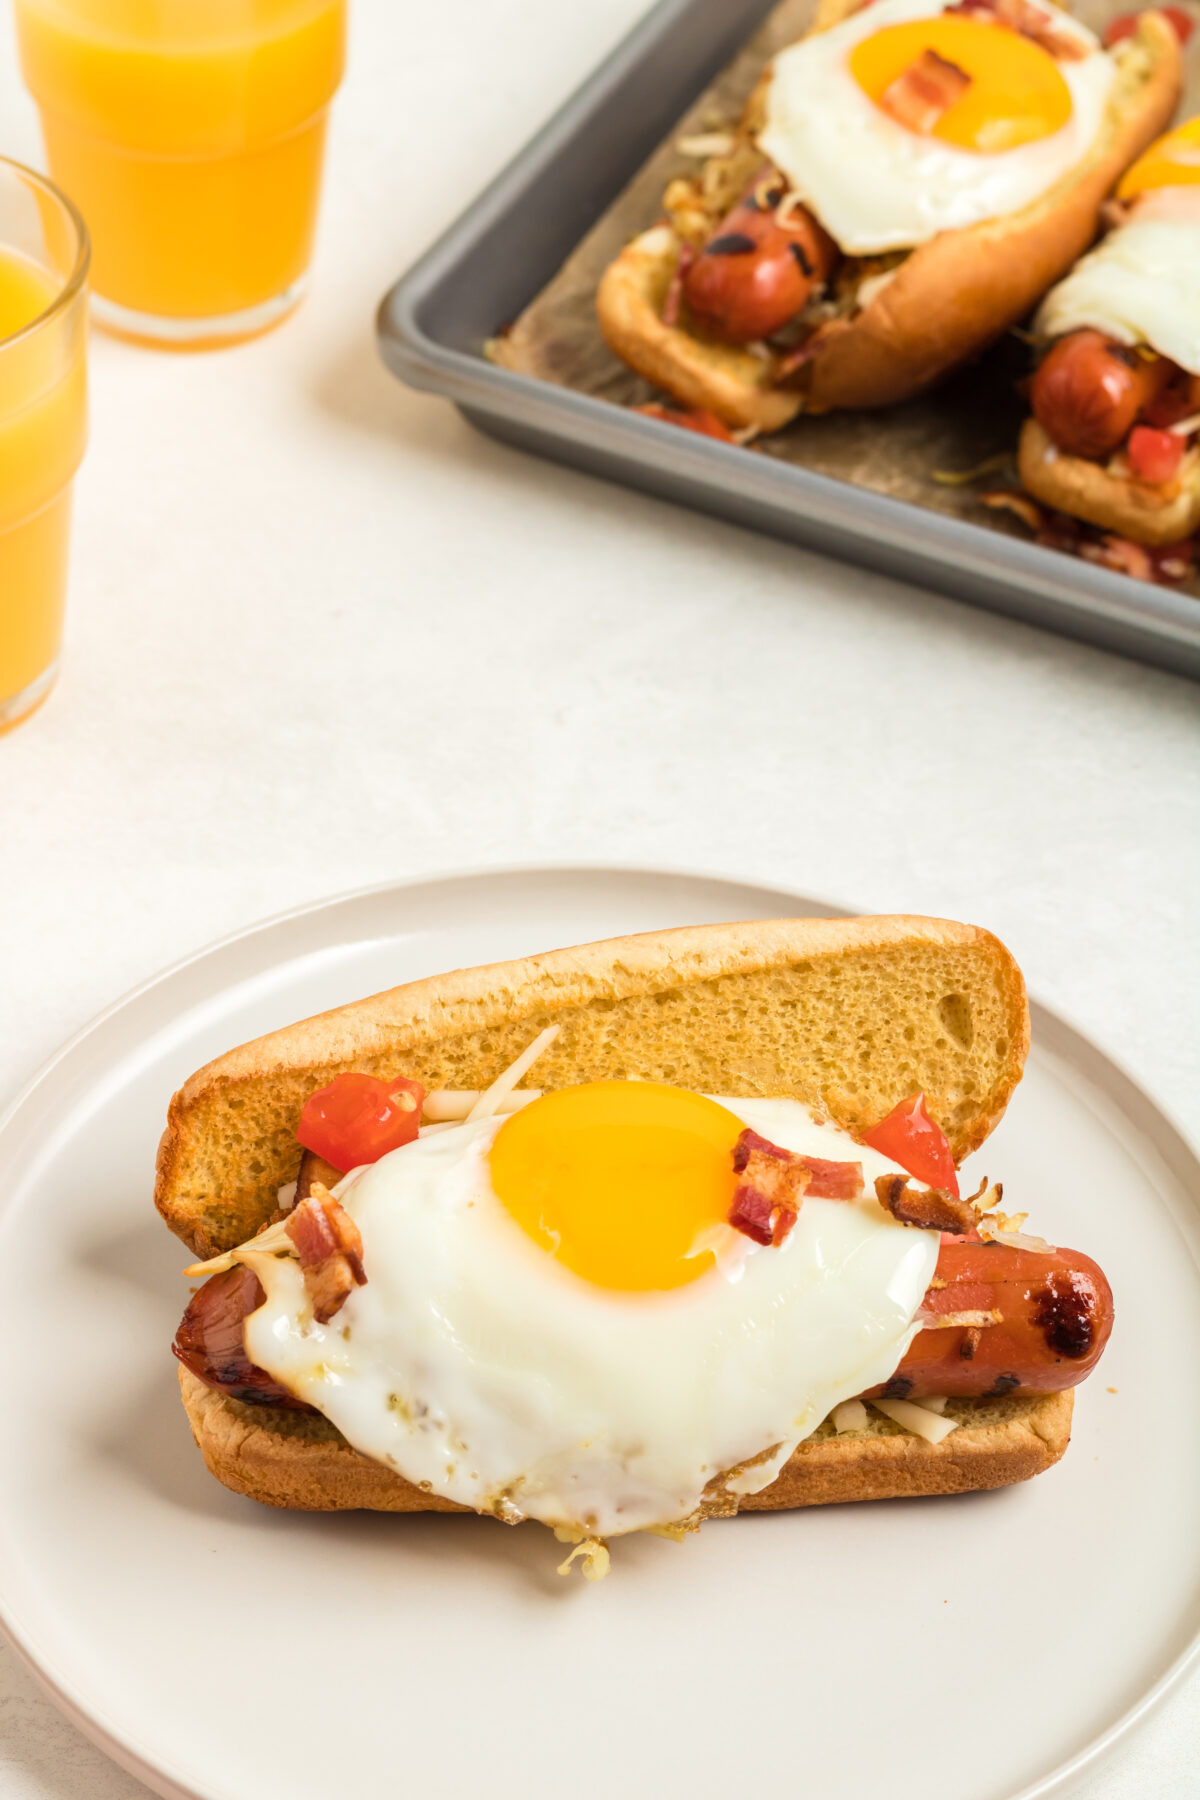 A tasty twist on the classic, our breakfast hot dogs feature hash browns, bacon, cheese, and a sunny side up egg. Great for any time of day!